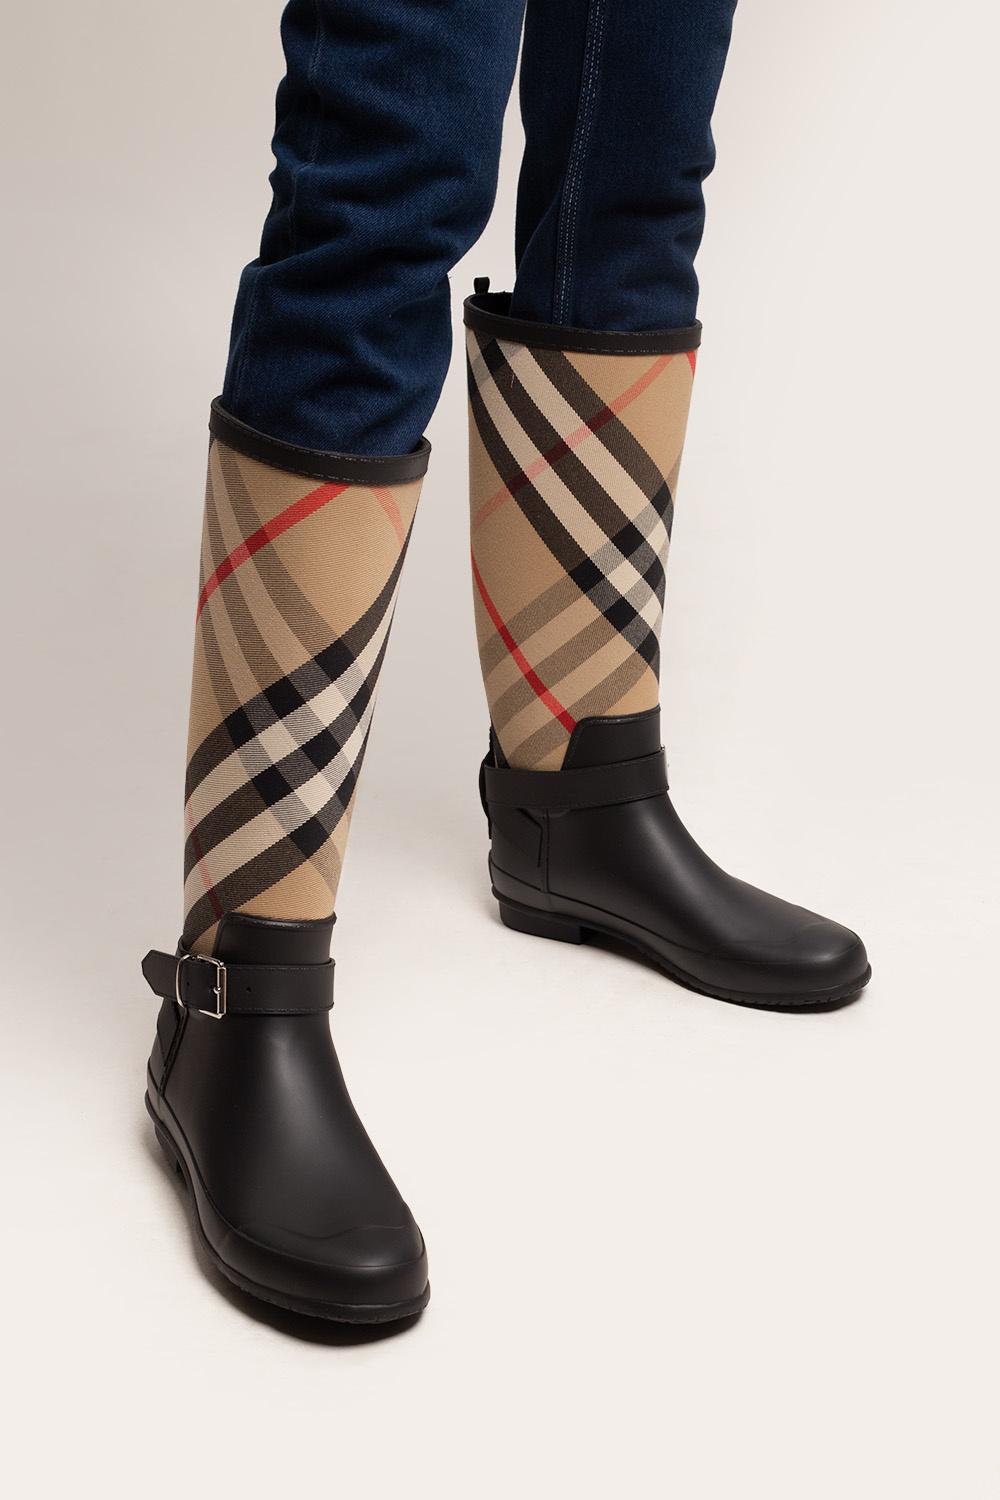 Burberry 'house Check' Rain Boots in Beige (Natural) | Lyst